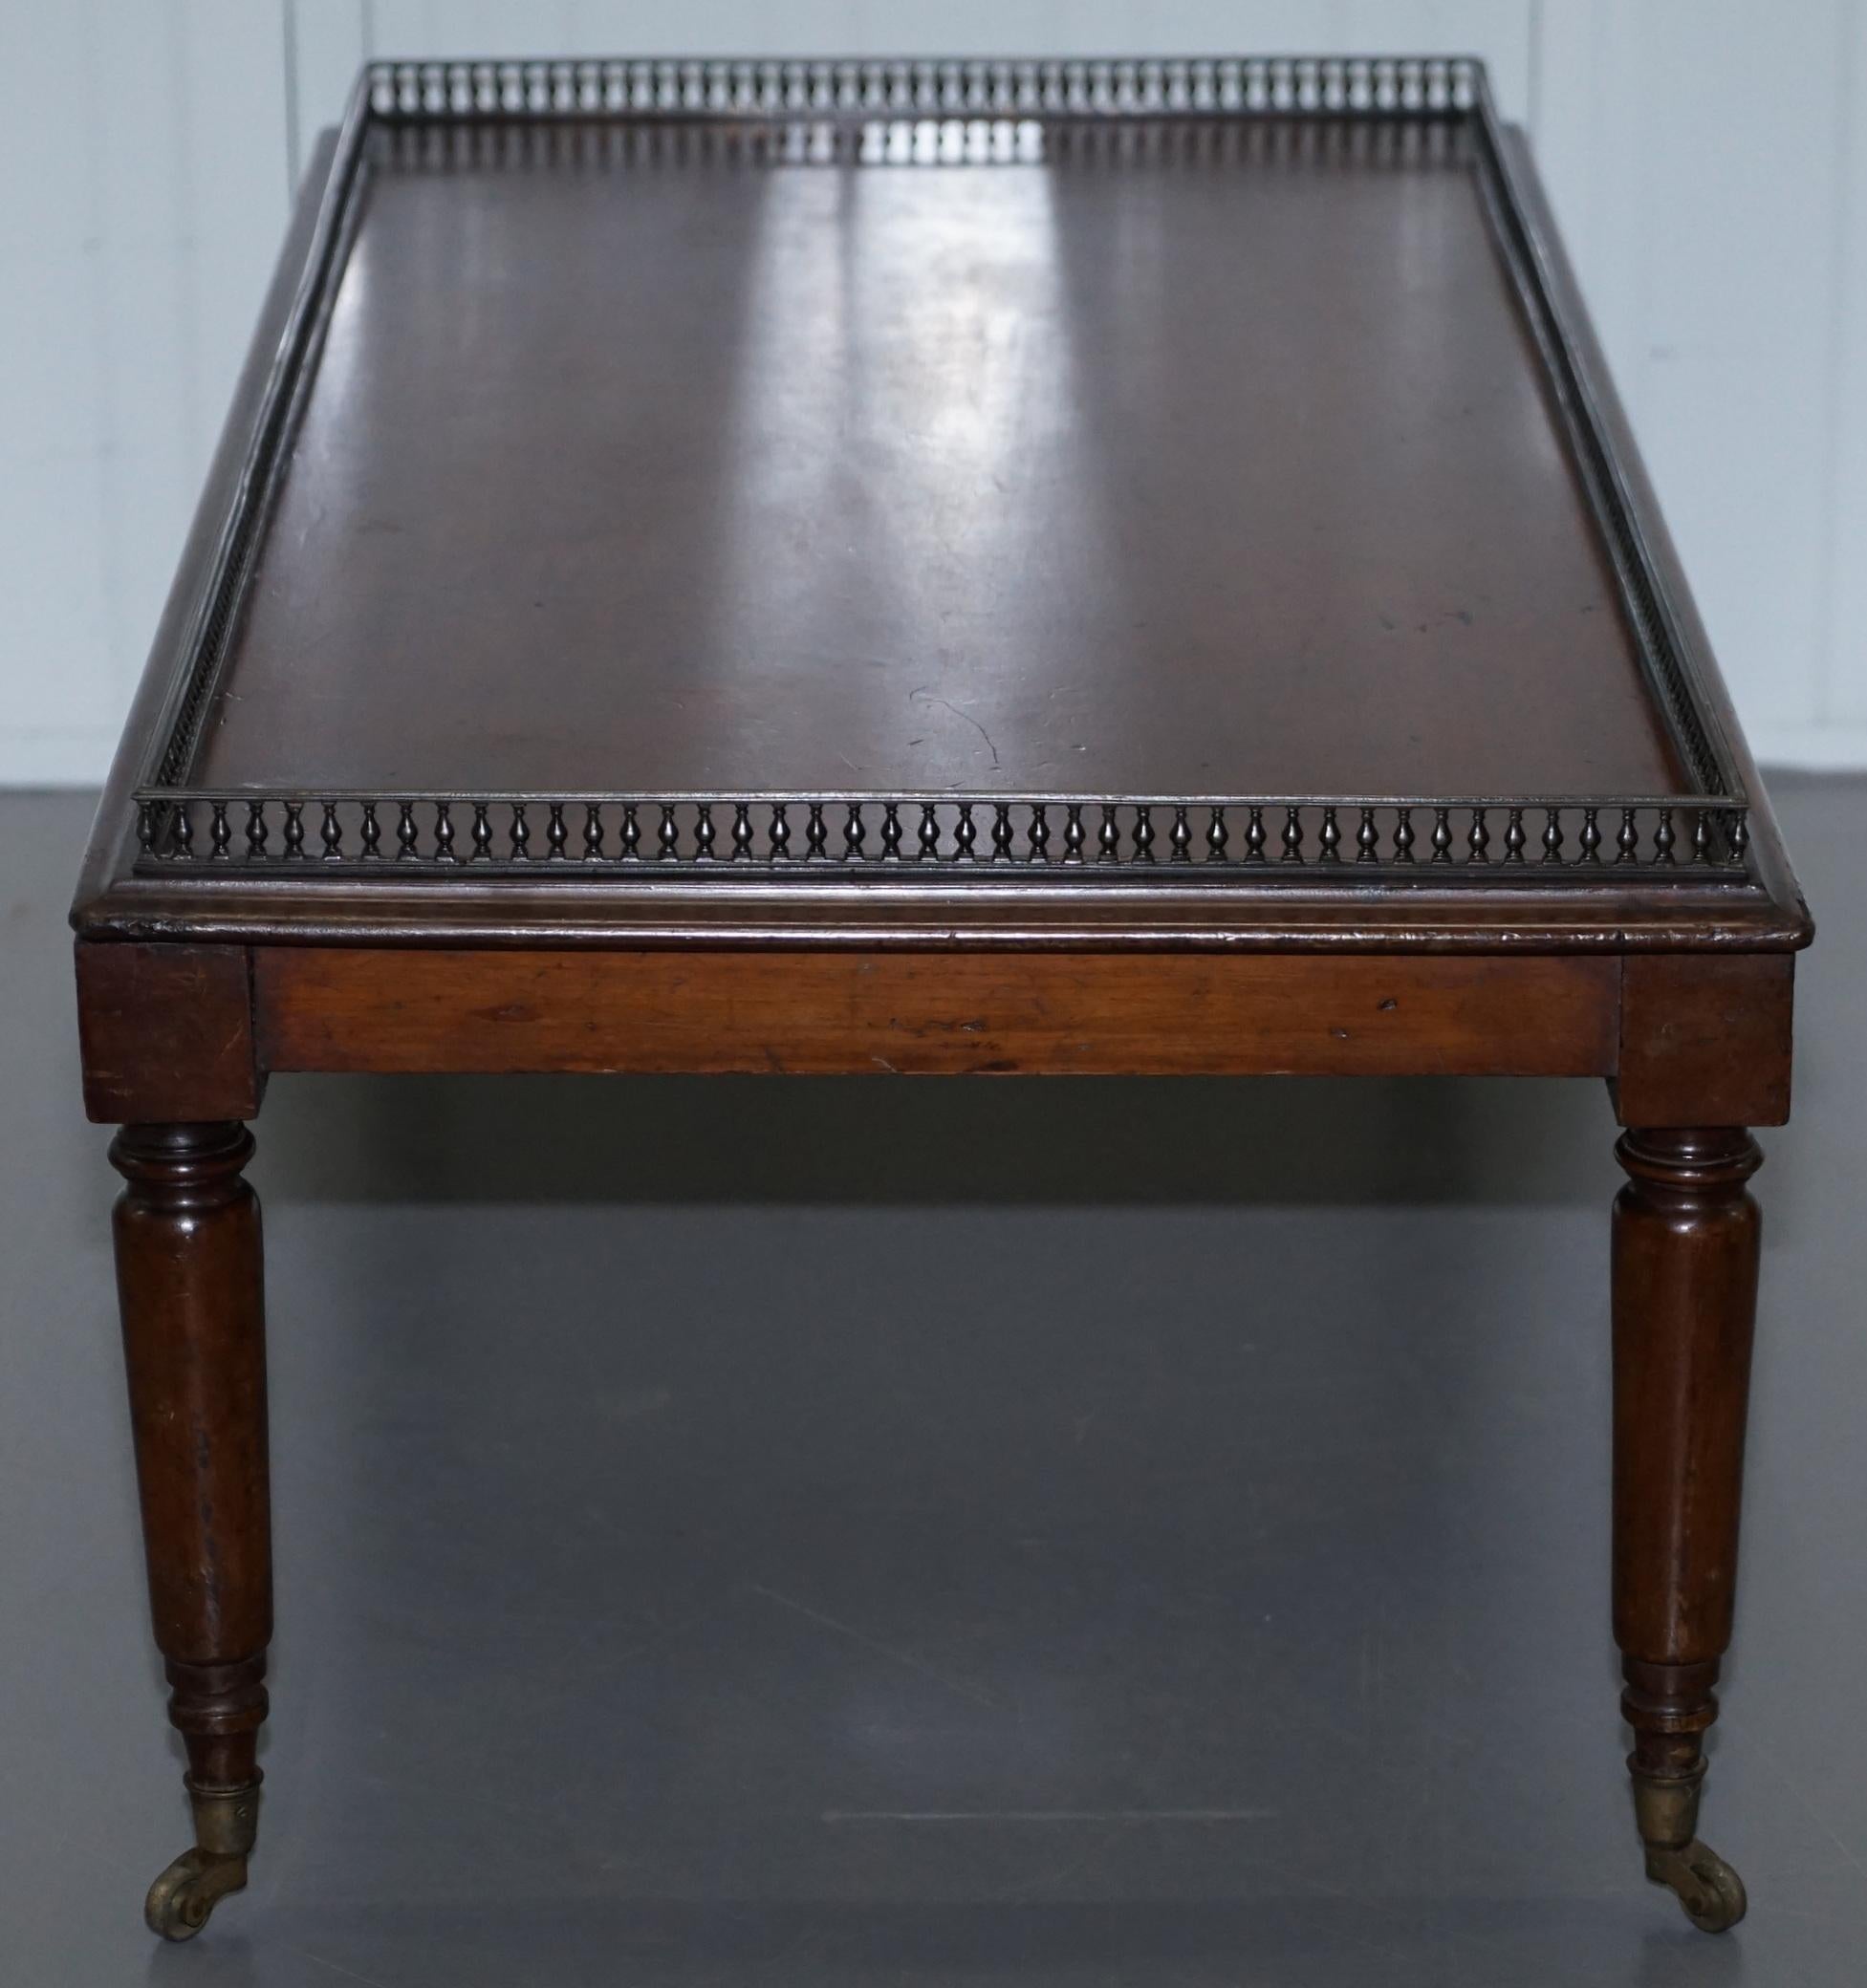 Very Rare Victorian Mahogany Coffee Table with Brass Gallery Rail after Gillows 6